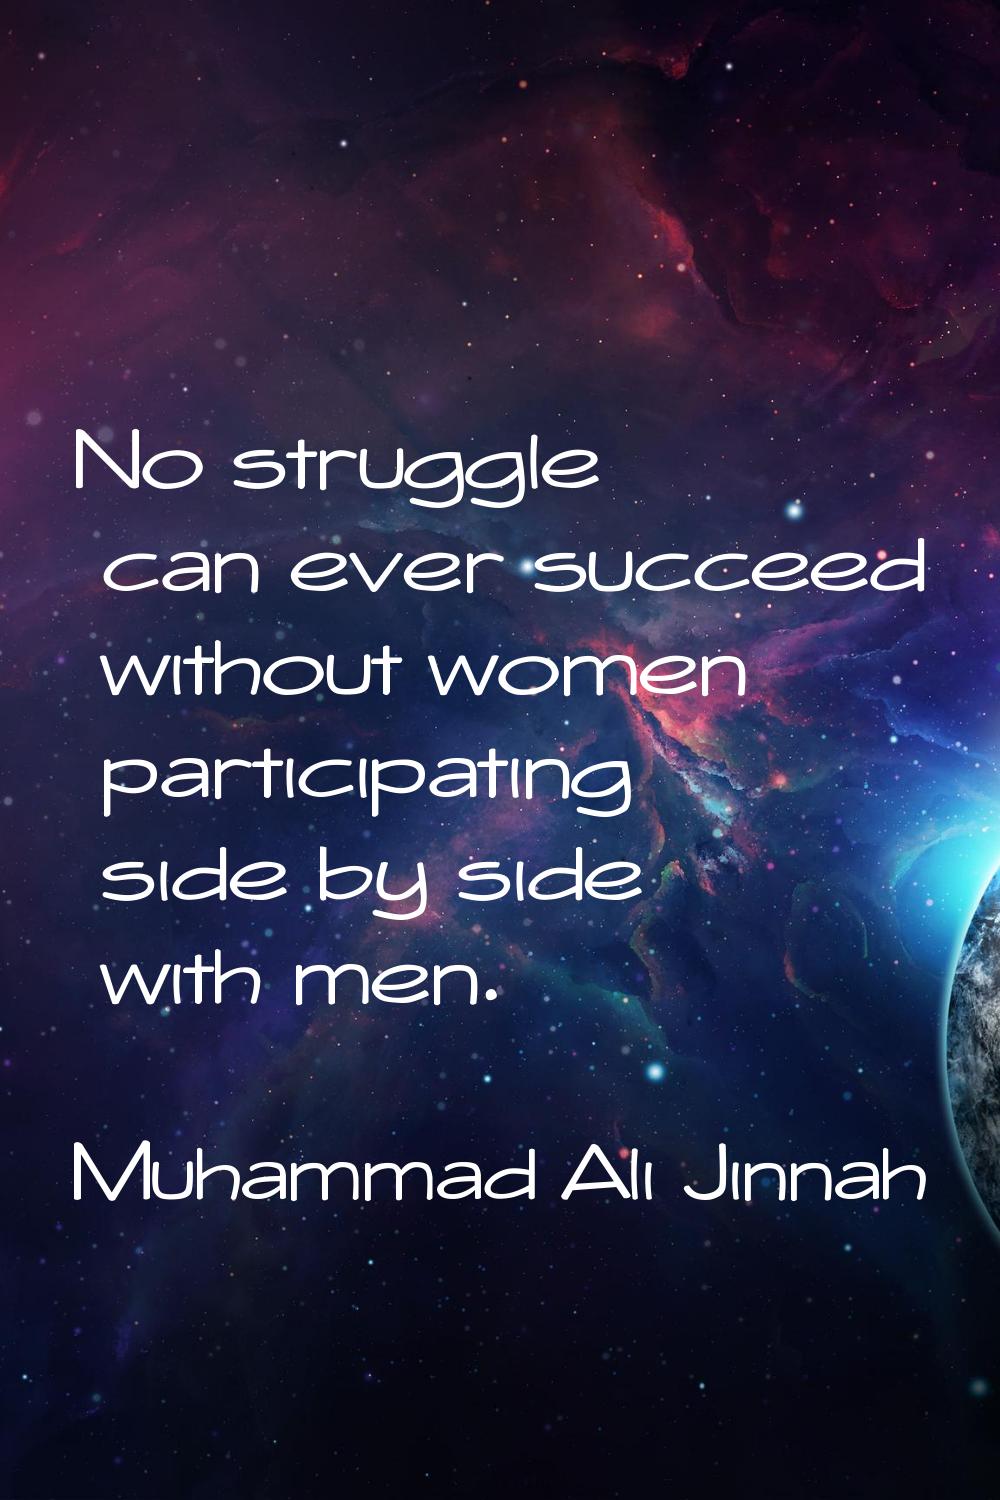 No struggle can ever succeed without women participating side by side with men.